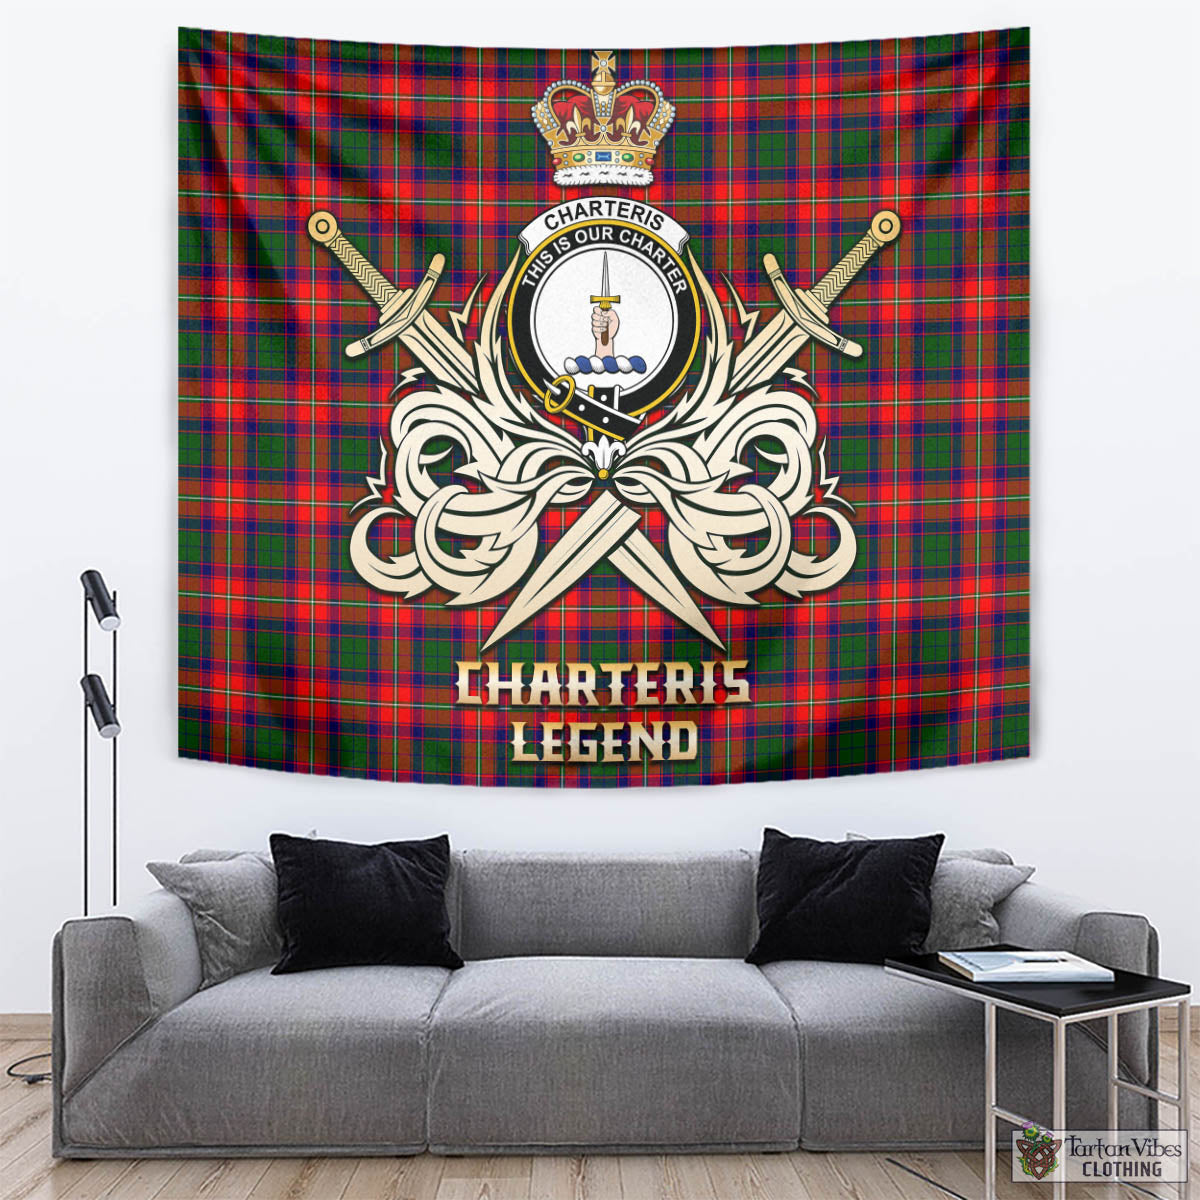 Tartan Vibes Clothing Charteris Tartan Tapestry with Clan Crest and the Golden Sword of Courageous Legacy